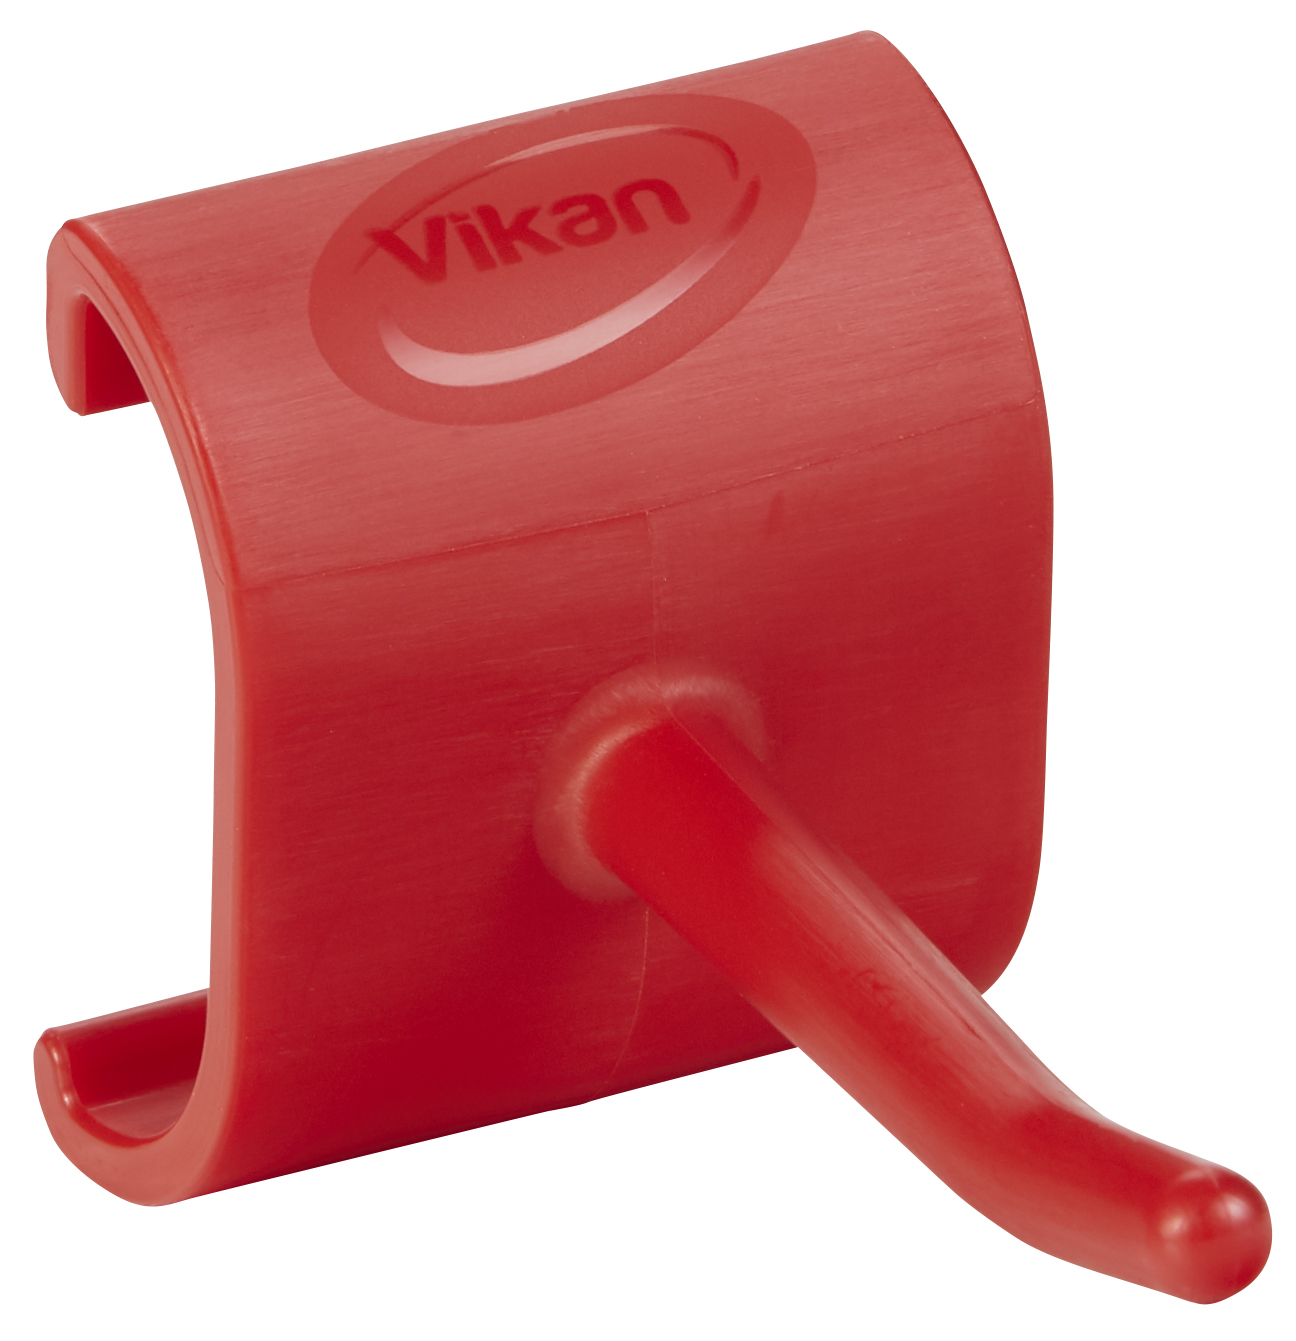 Vikan spare part hook for 1011x, 1012x & 1014x, Red